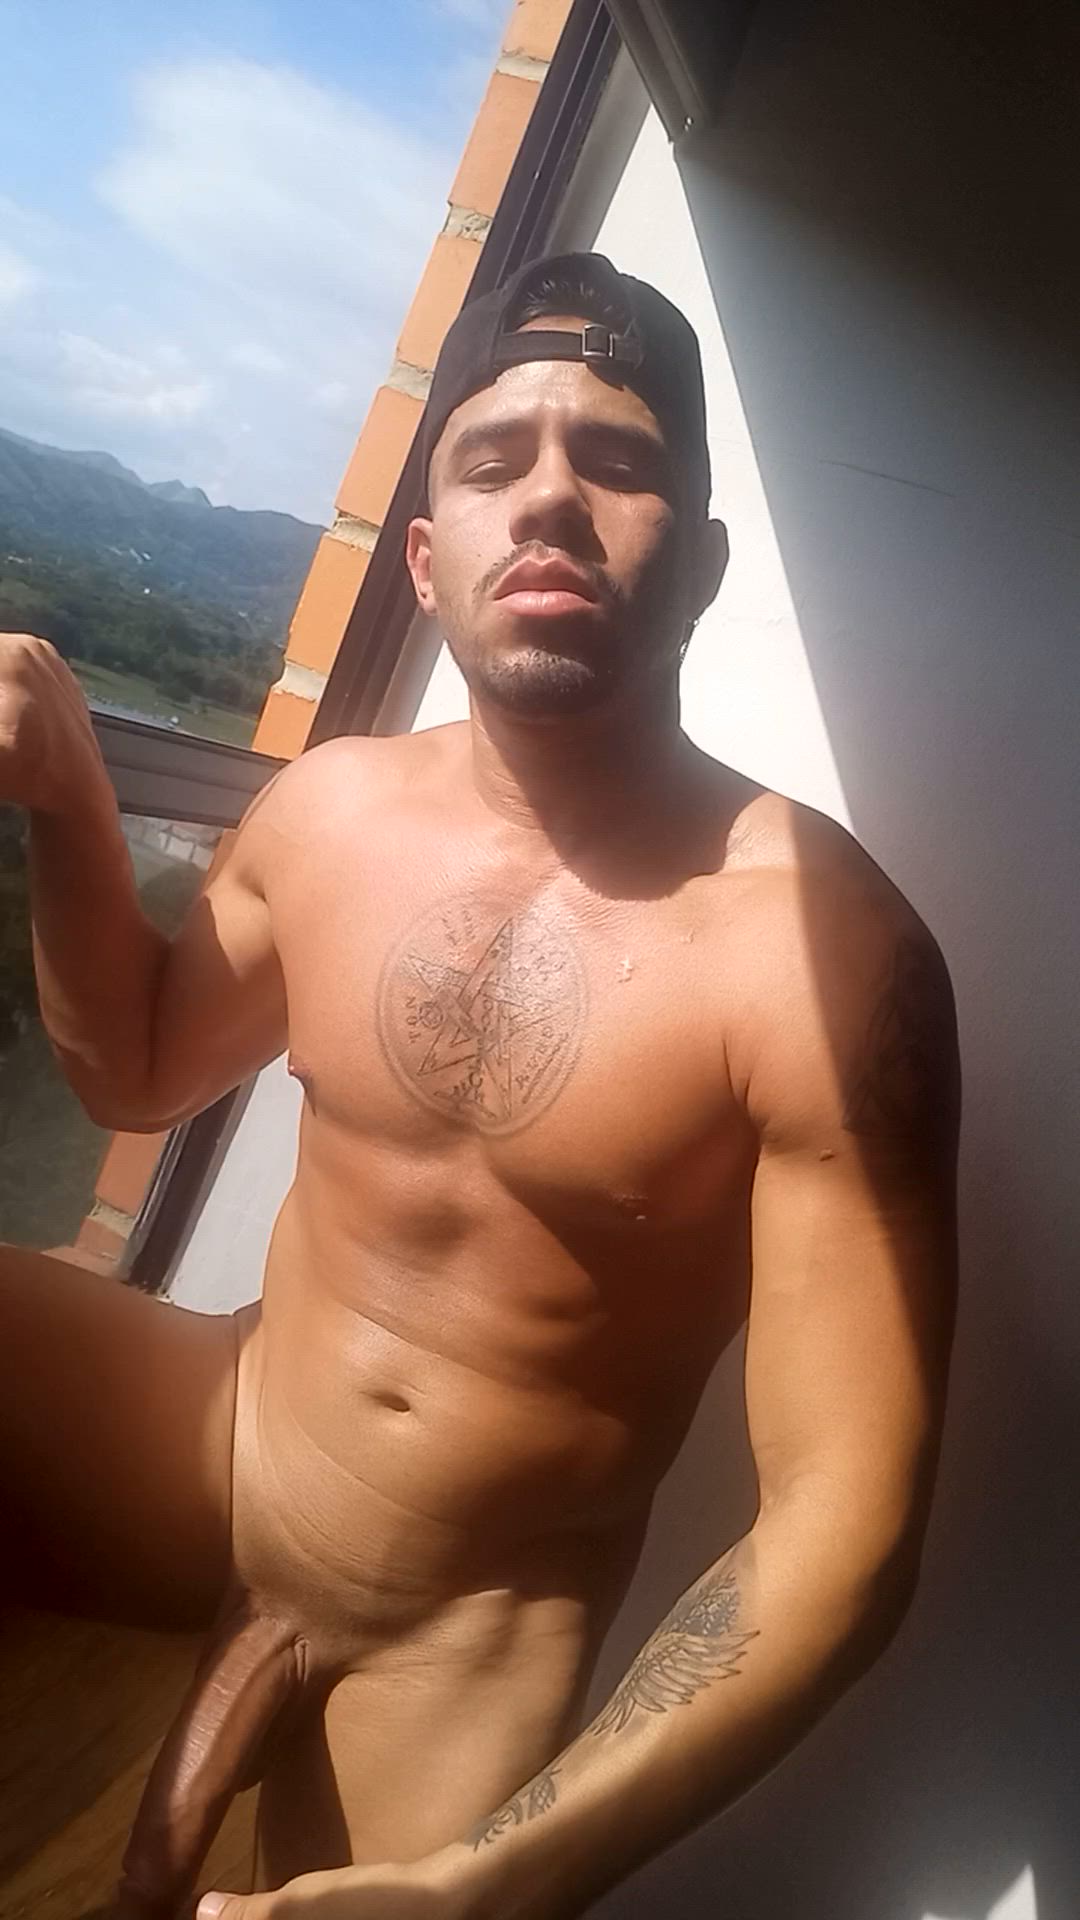 Amateur porn video with onlyfans model ransedofficial <strong>@ransed1official</strong>